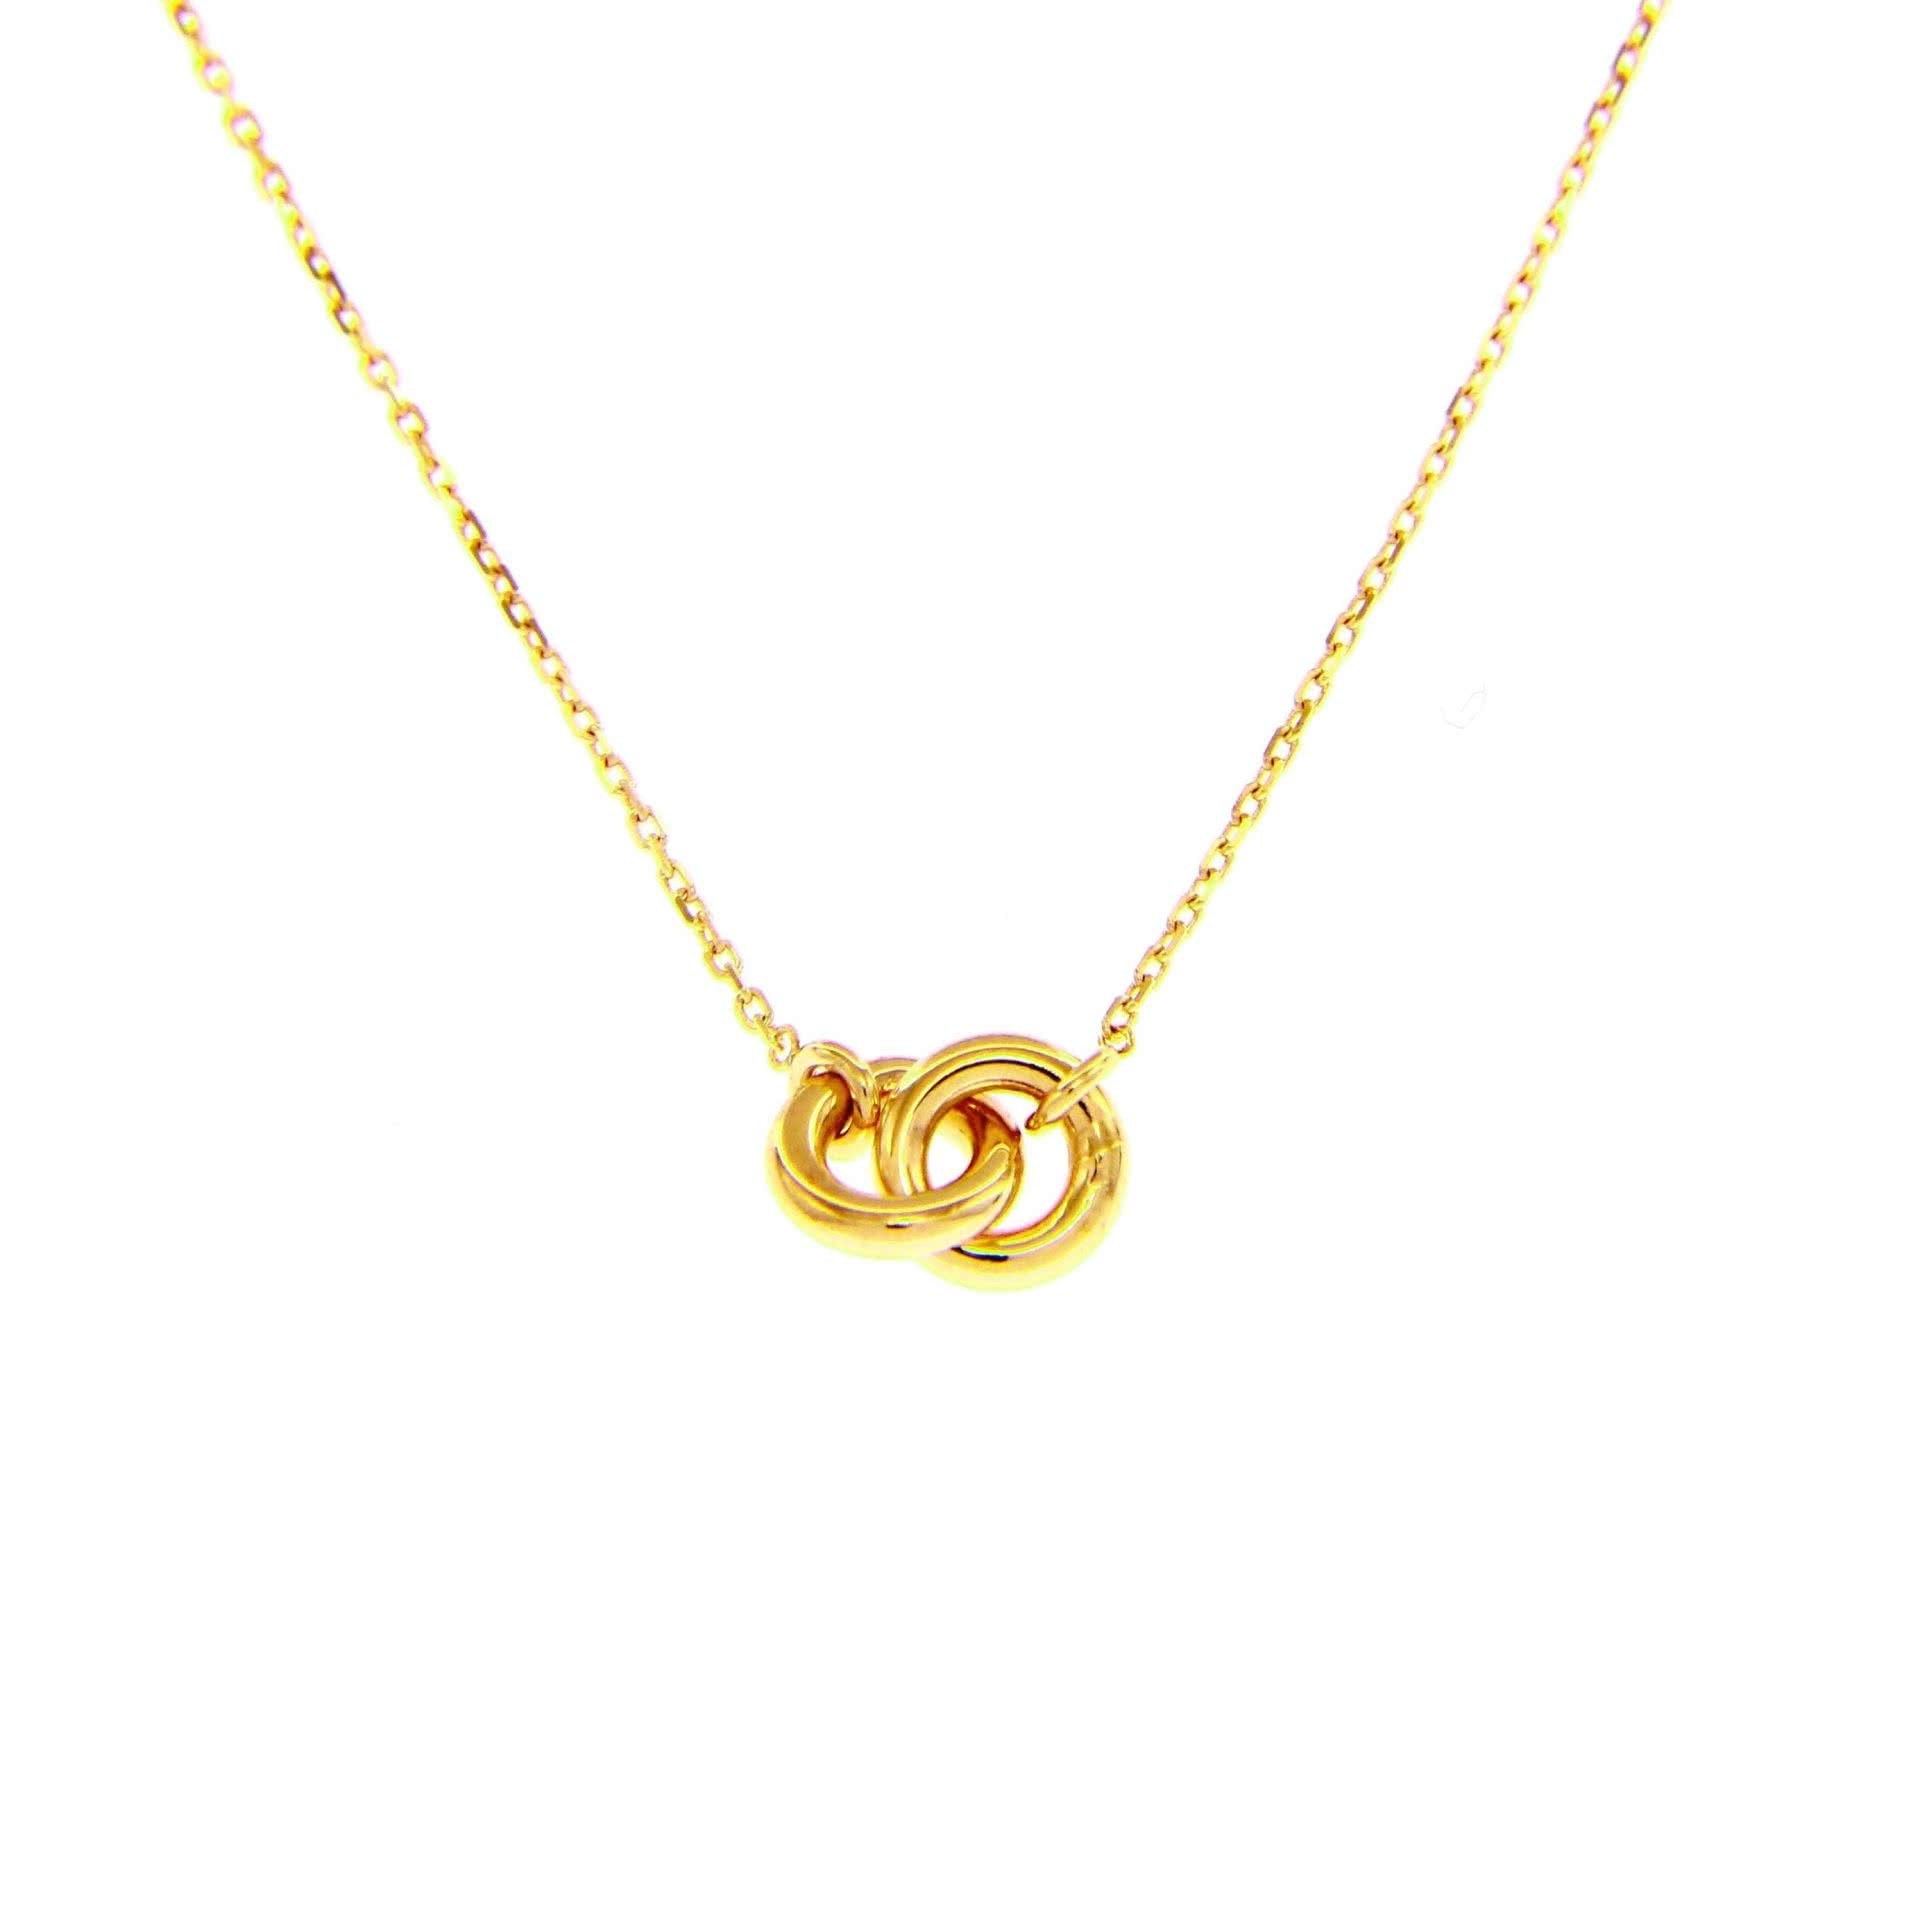 18ct yellow gold double circle necklace | Cerrone Jewellers